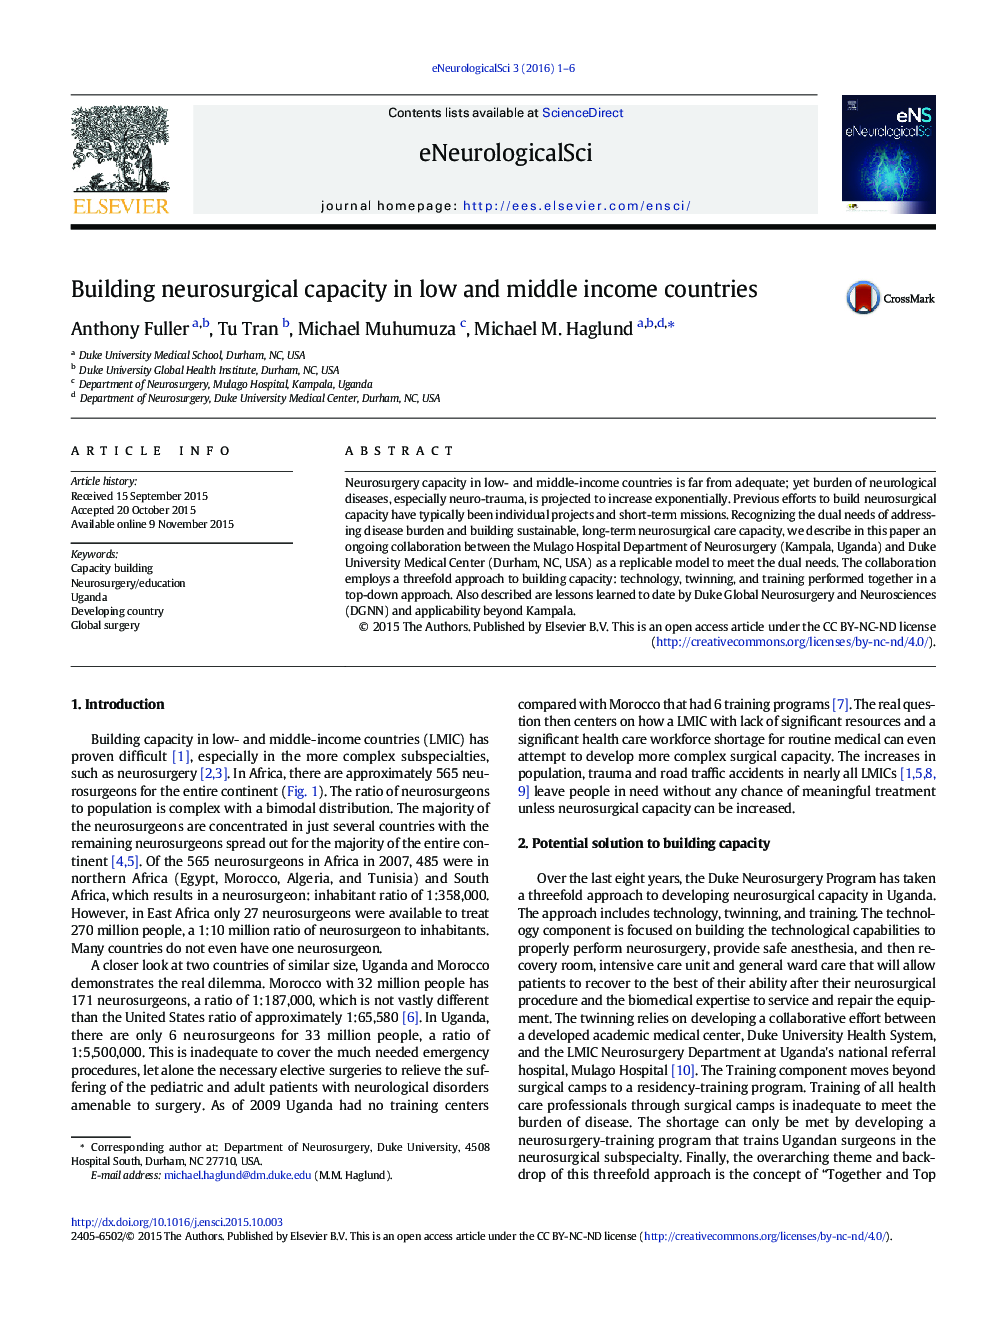 Building neurosurgical capacity in low and middle income countries